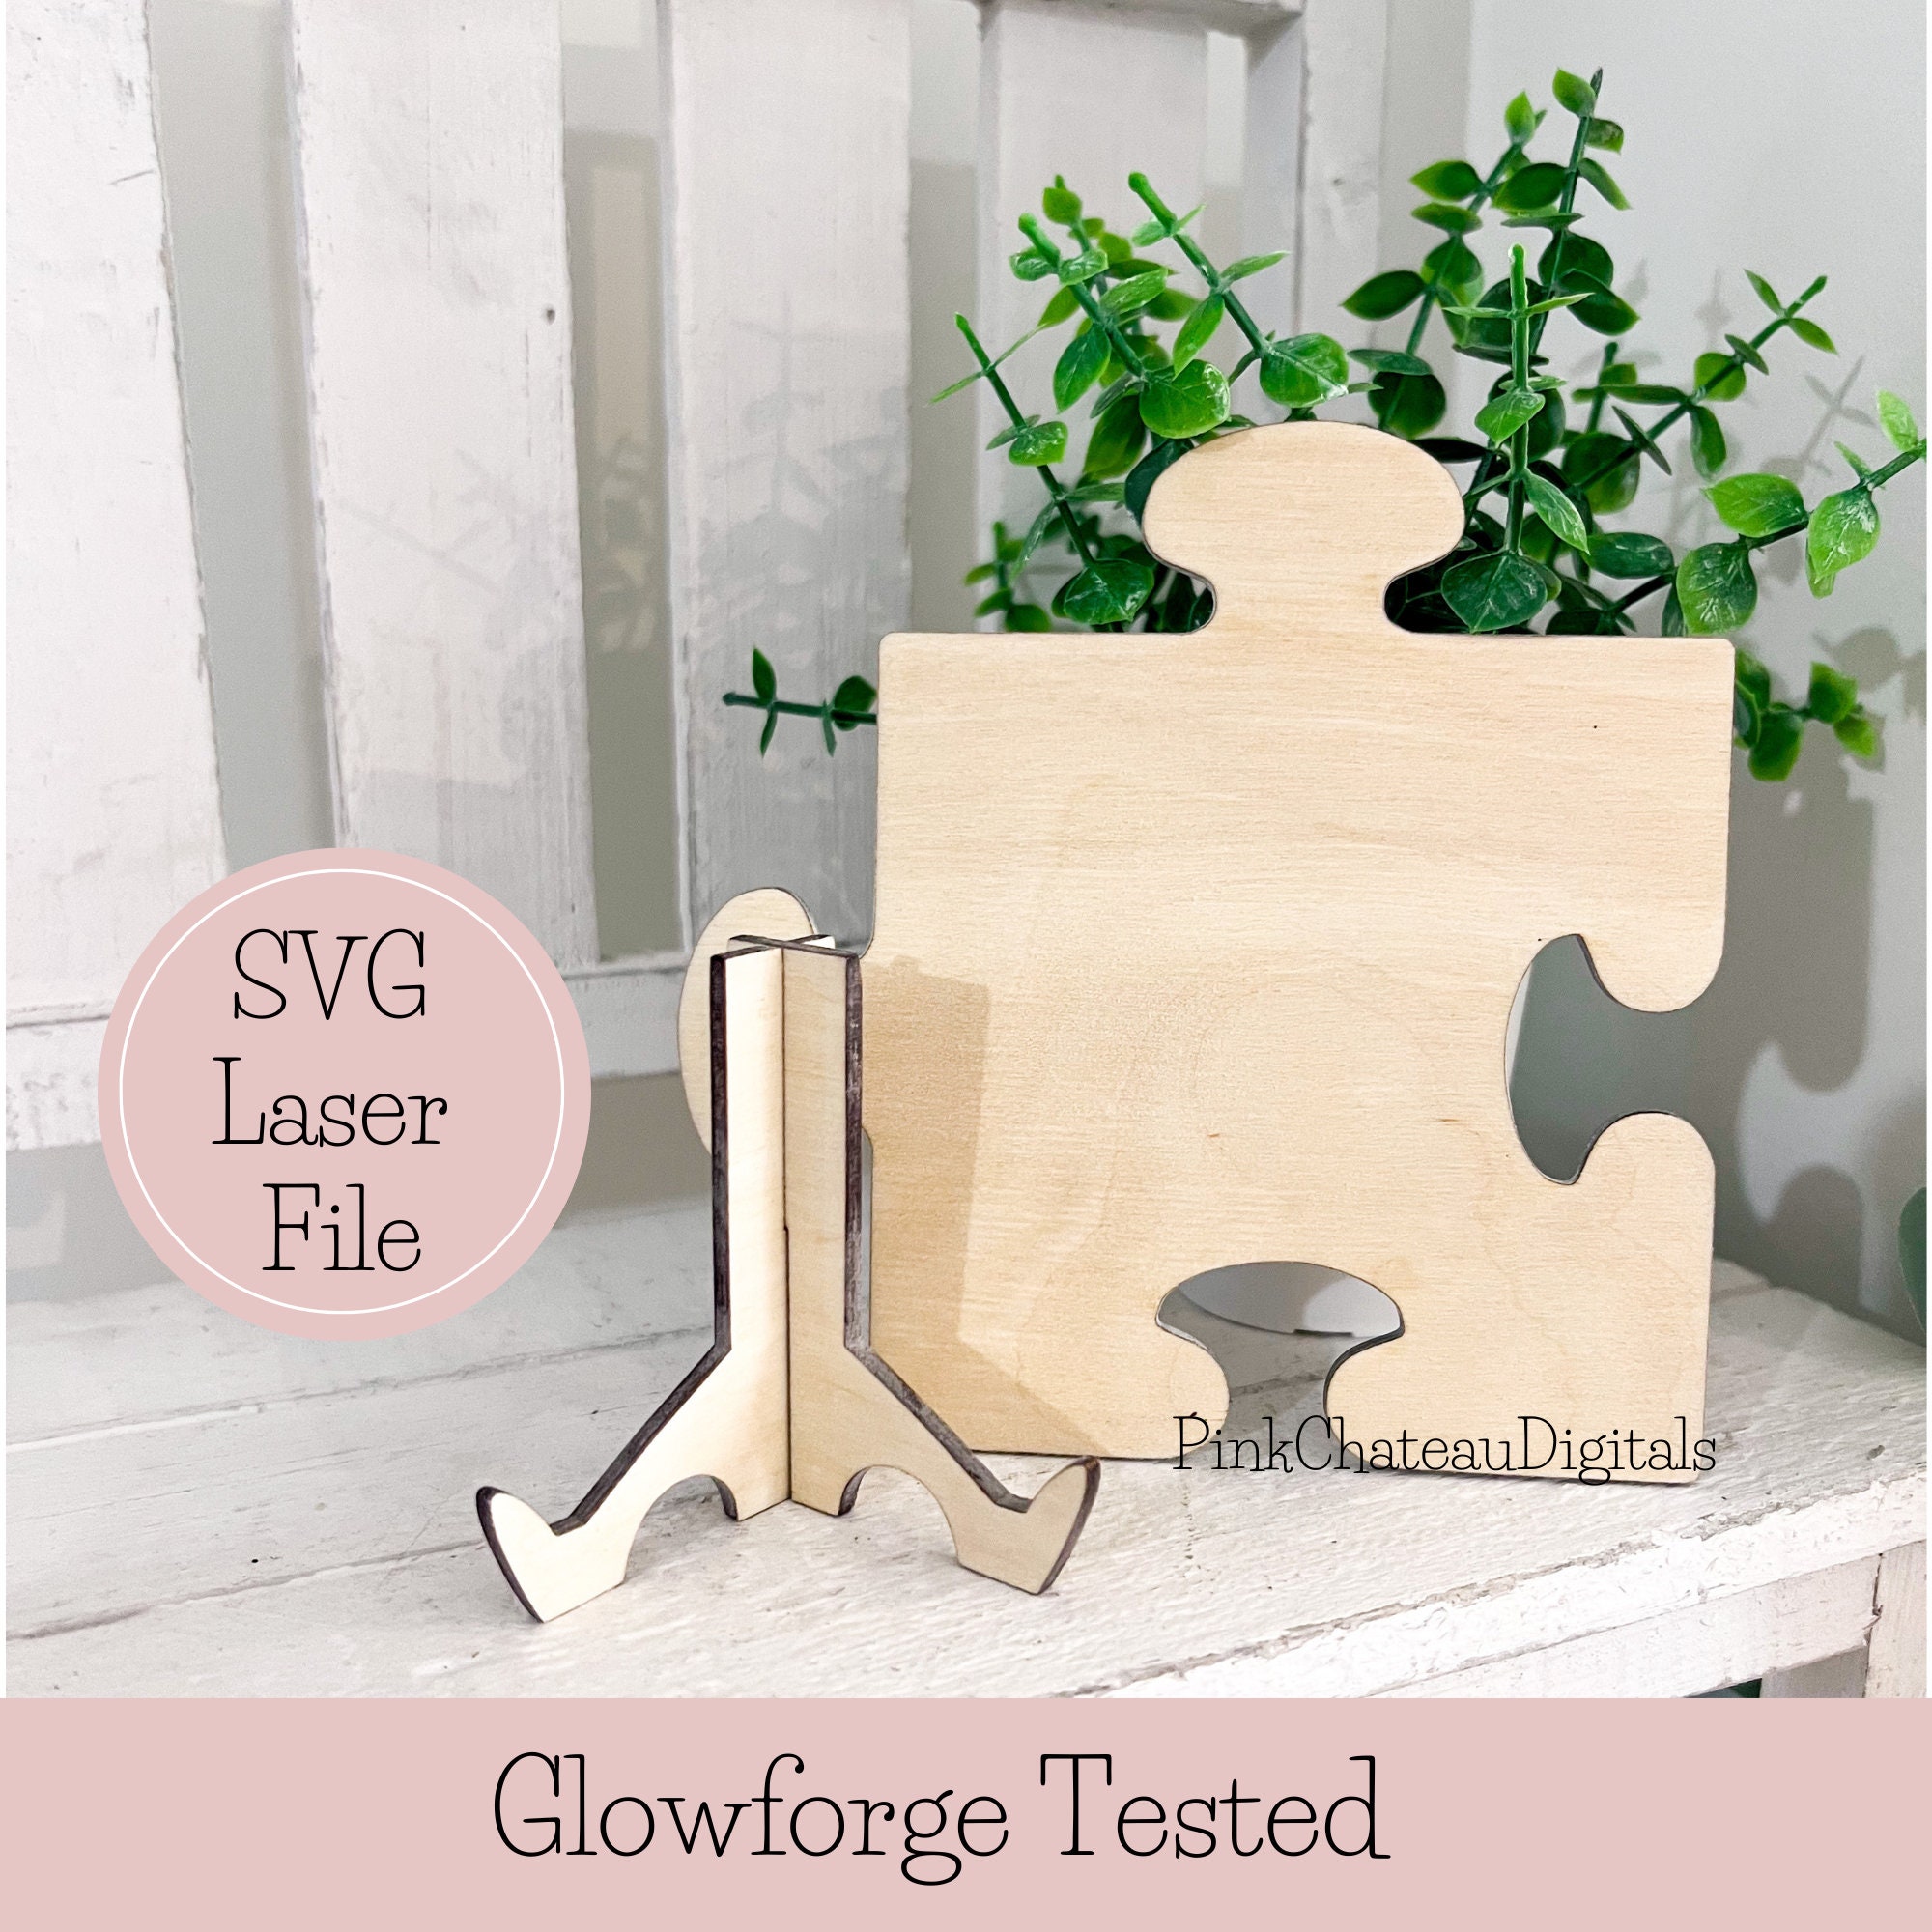 Wooden Numbers Puzzle – Glowforge Shop